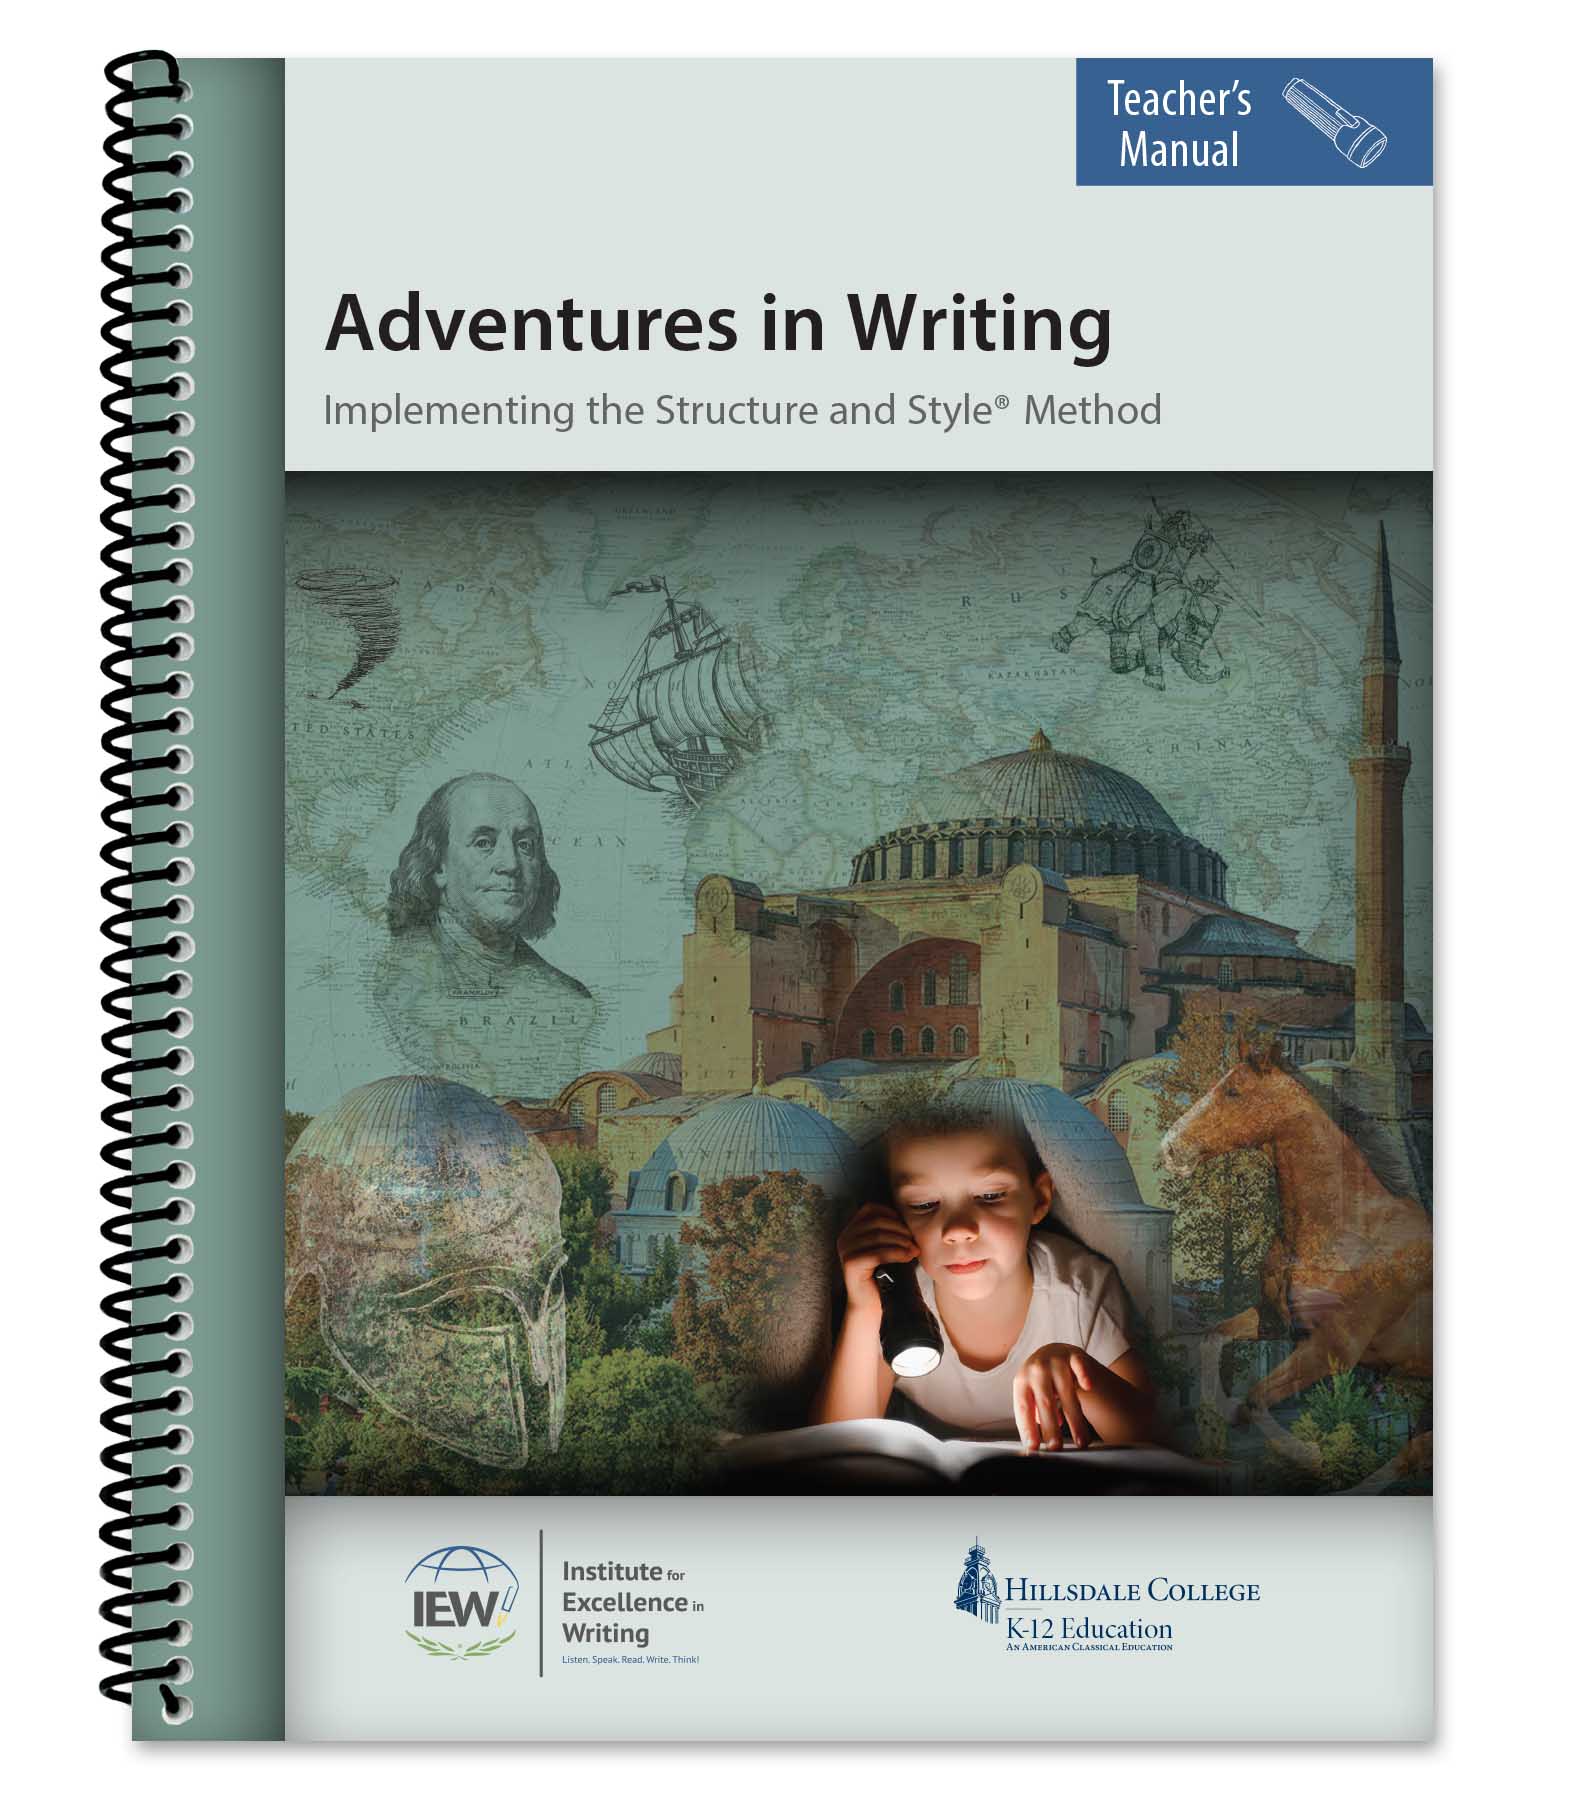 Adventures in Writing [Teacher's Manual only]